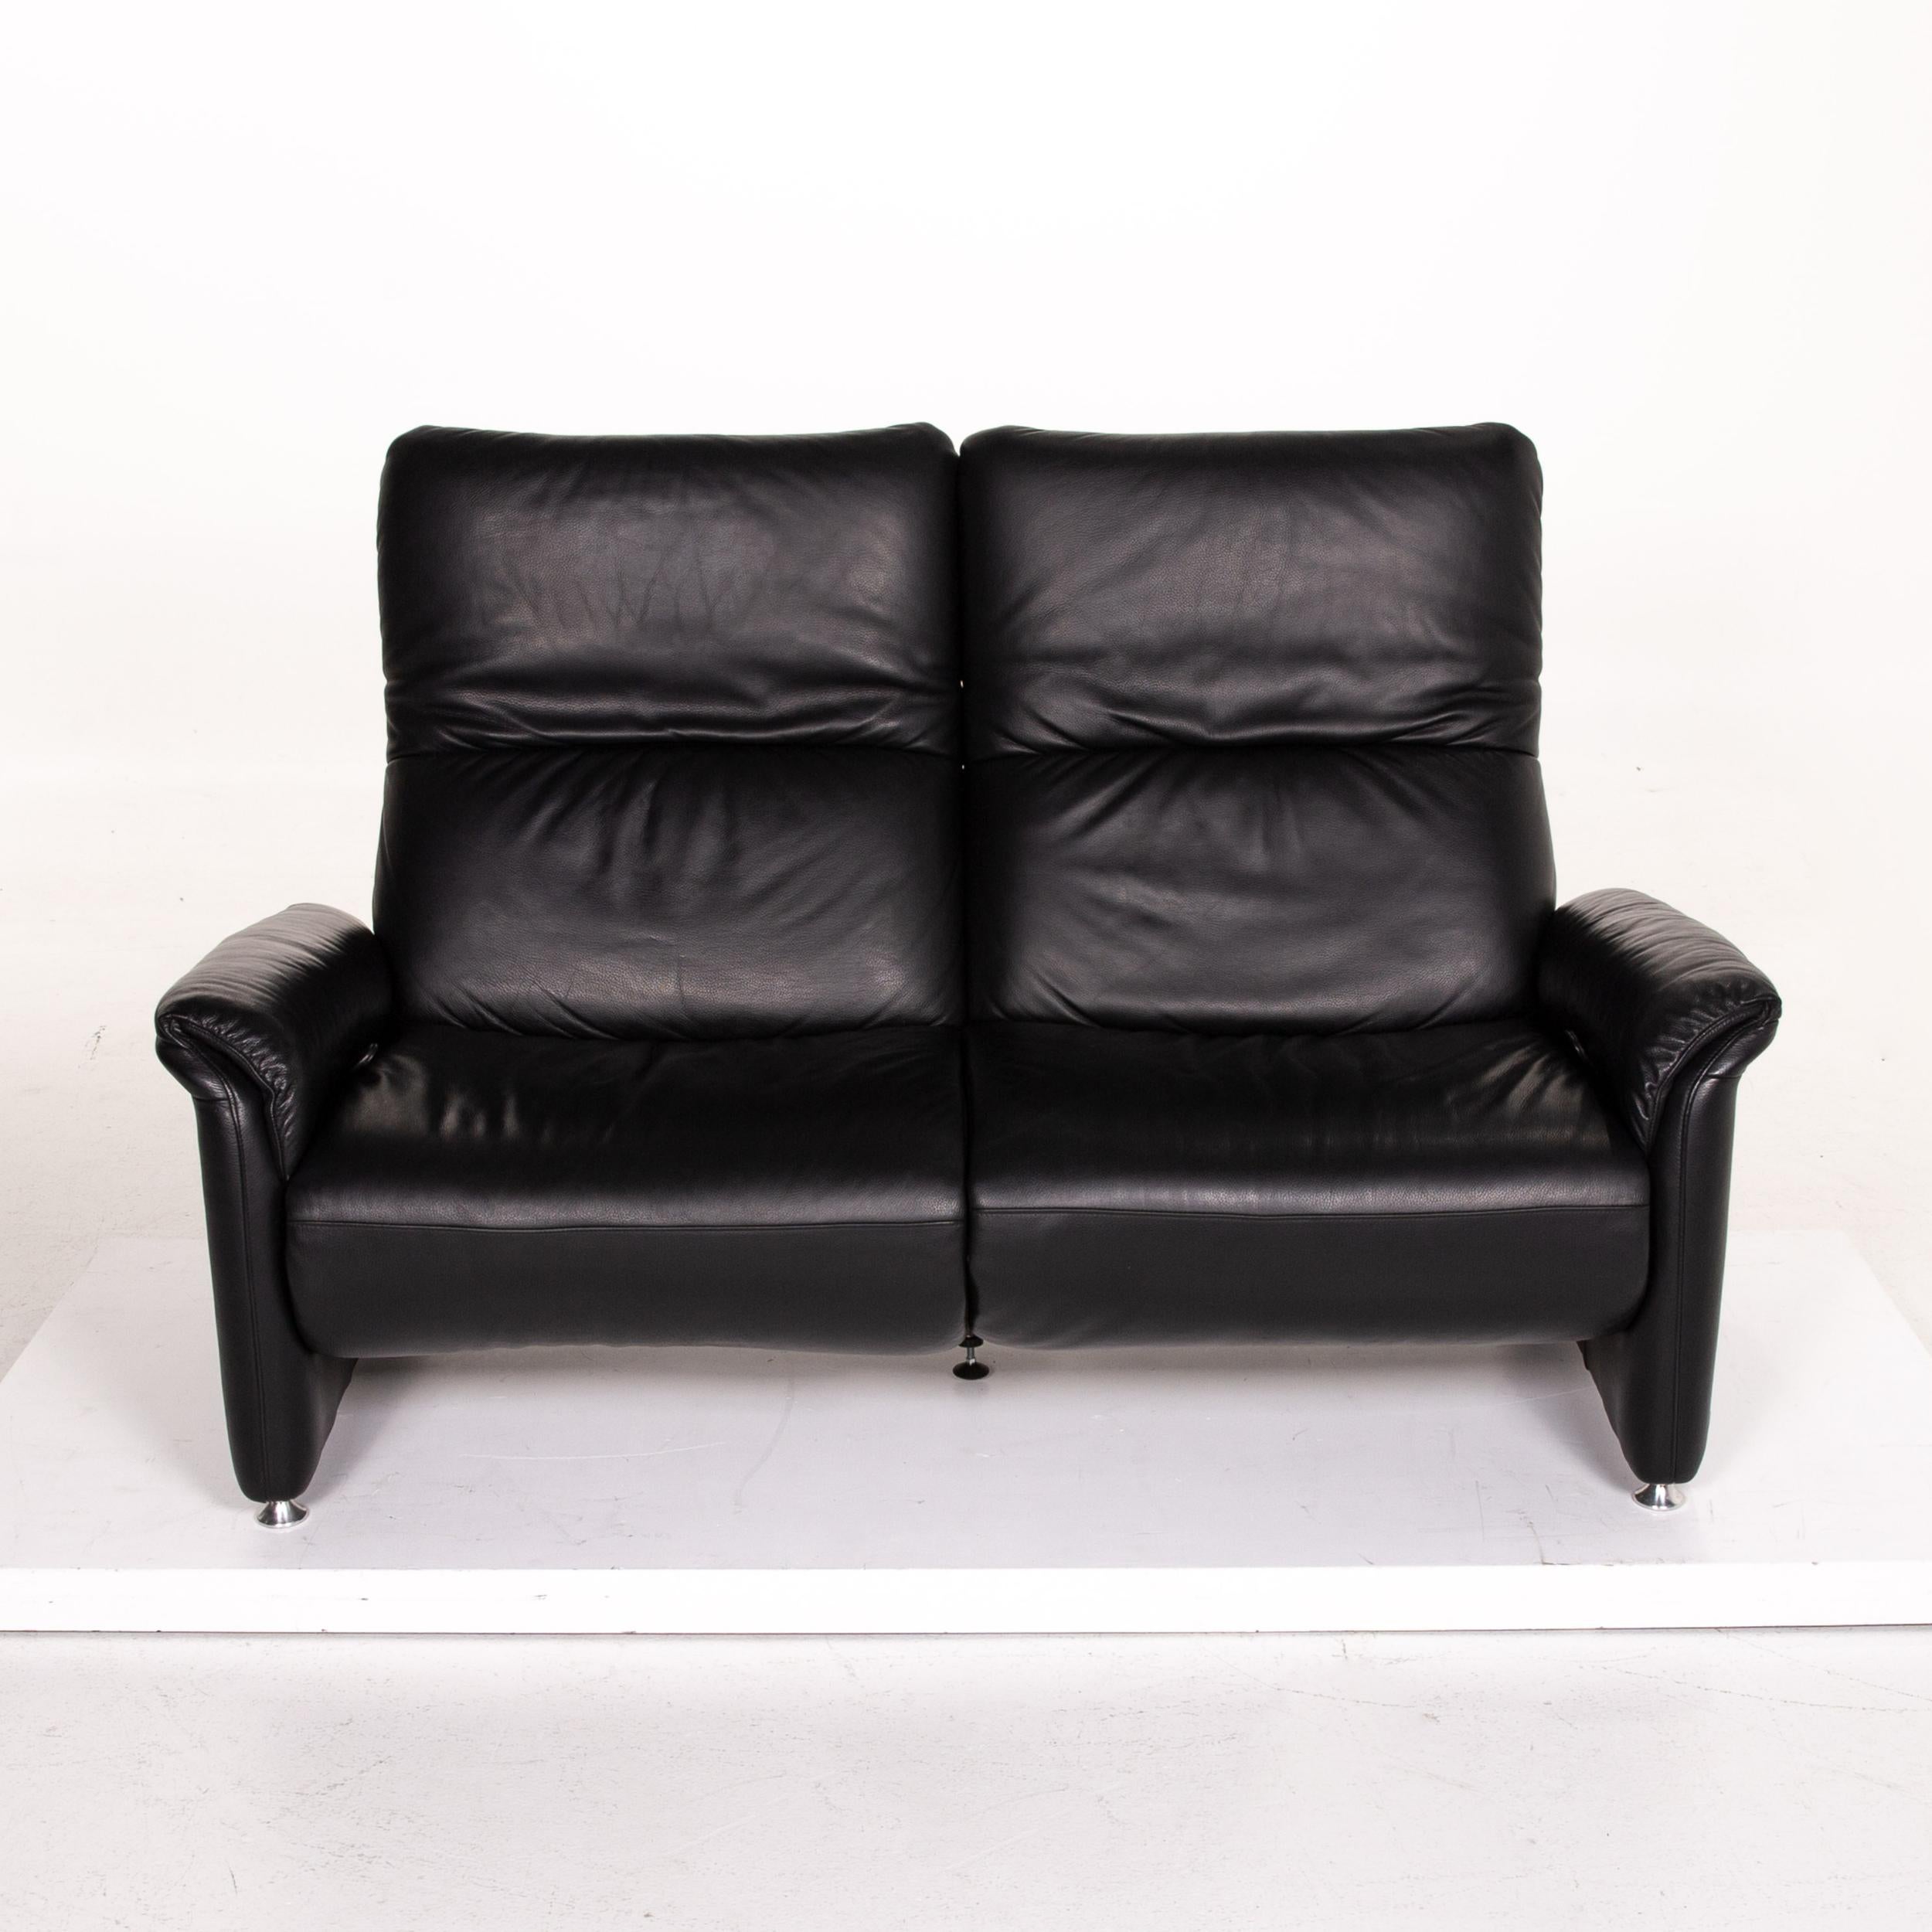 Willi Schillig Ergoline Leather Sofa Black Two-Seat Function Relax Function For Sale 3